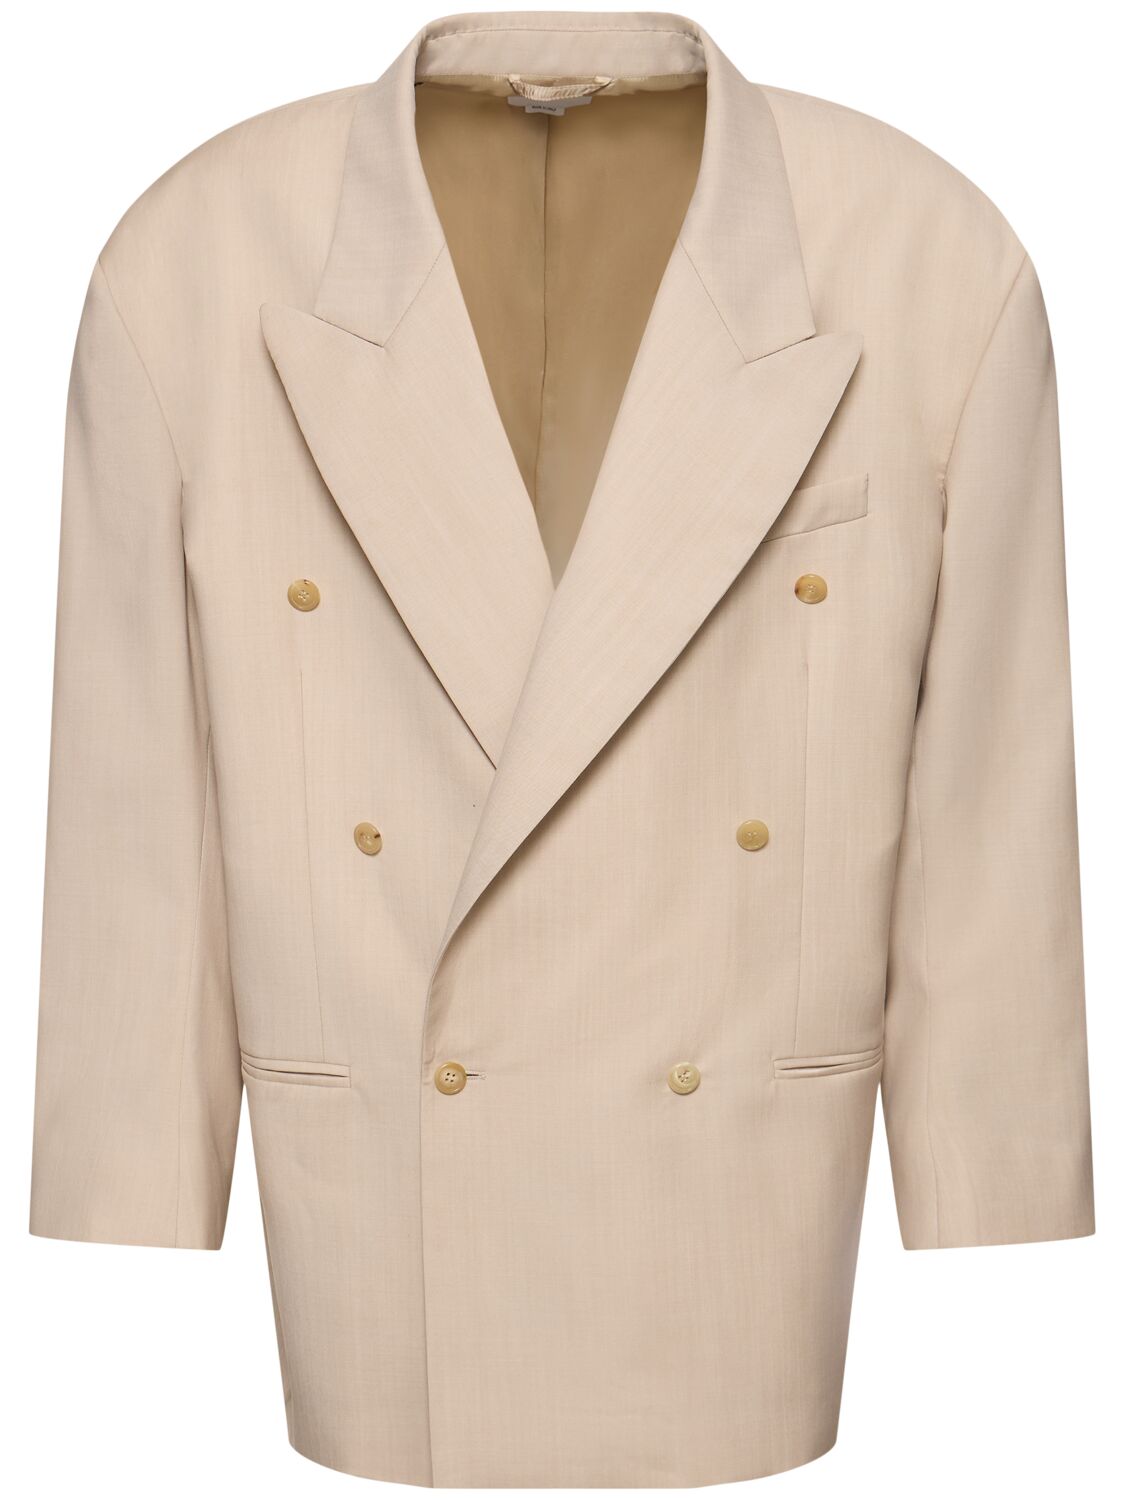 Image of Light Wool Double Breasted Jacket